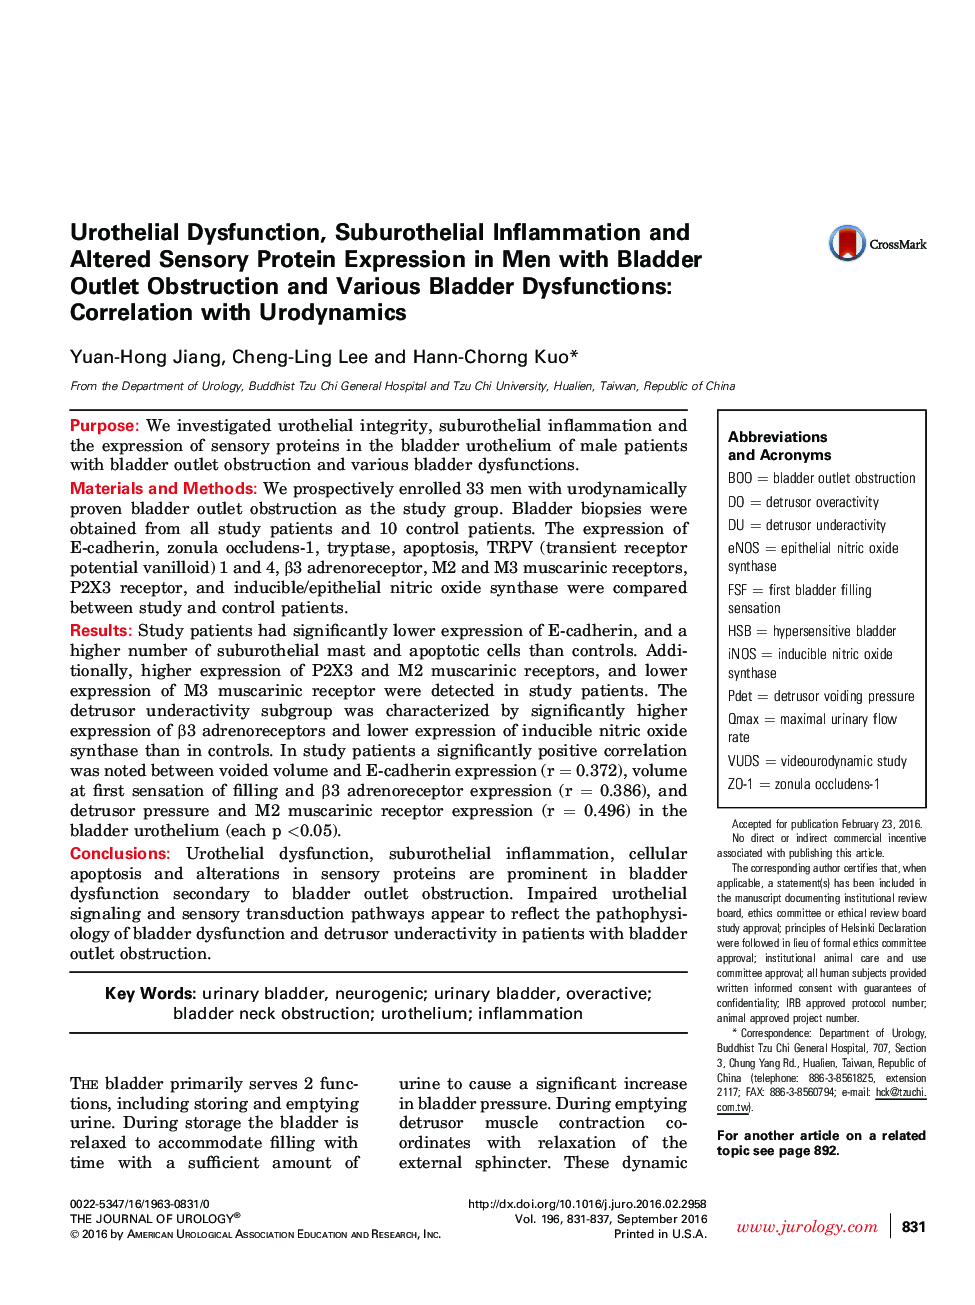 Urothelial Dysfunction, Suburothelial Inflammation and Altered Sensory Protein Expression in Men with Bladder Outlet Obstruction and Various Bladder Dysfunctions: Correlation with Urodynamics 